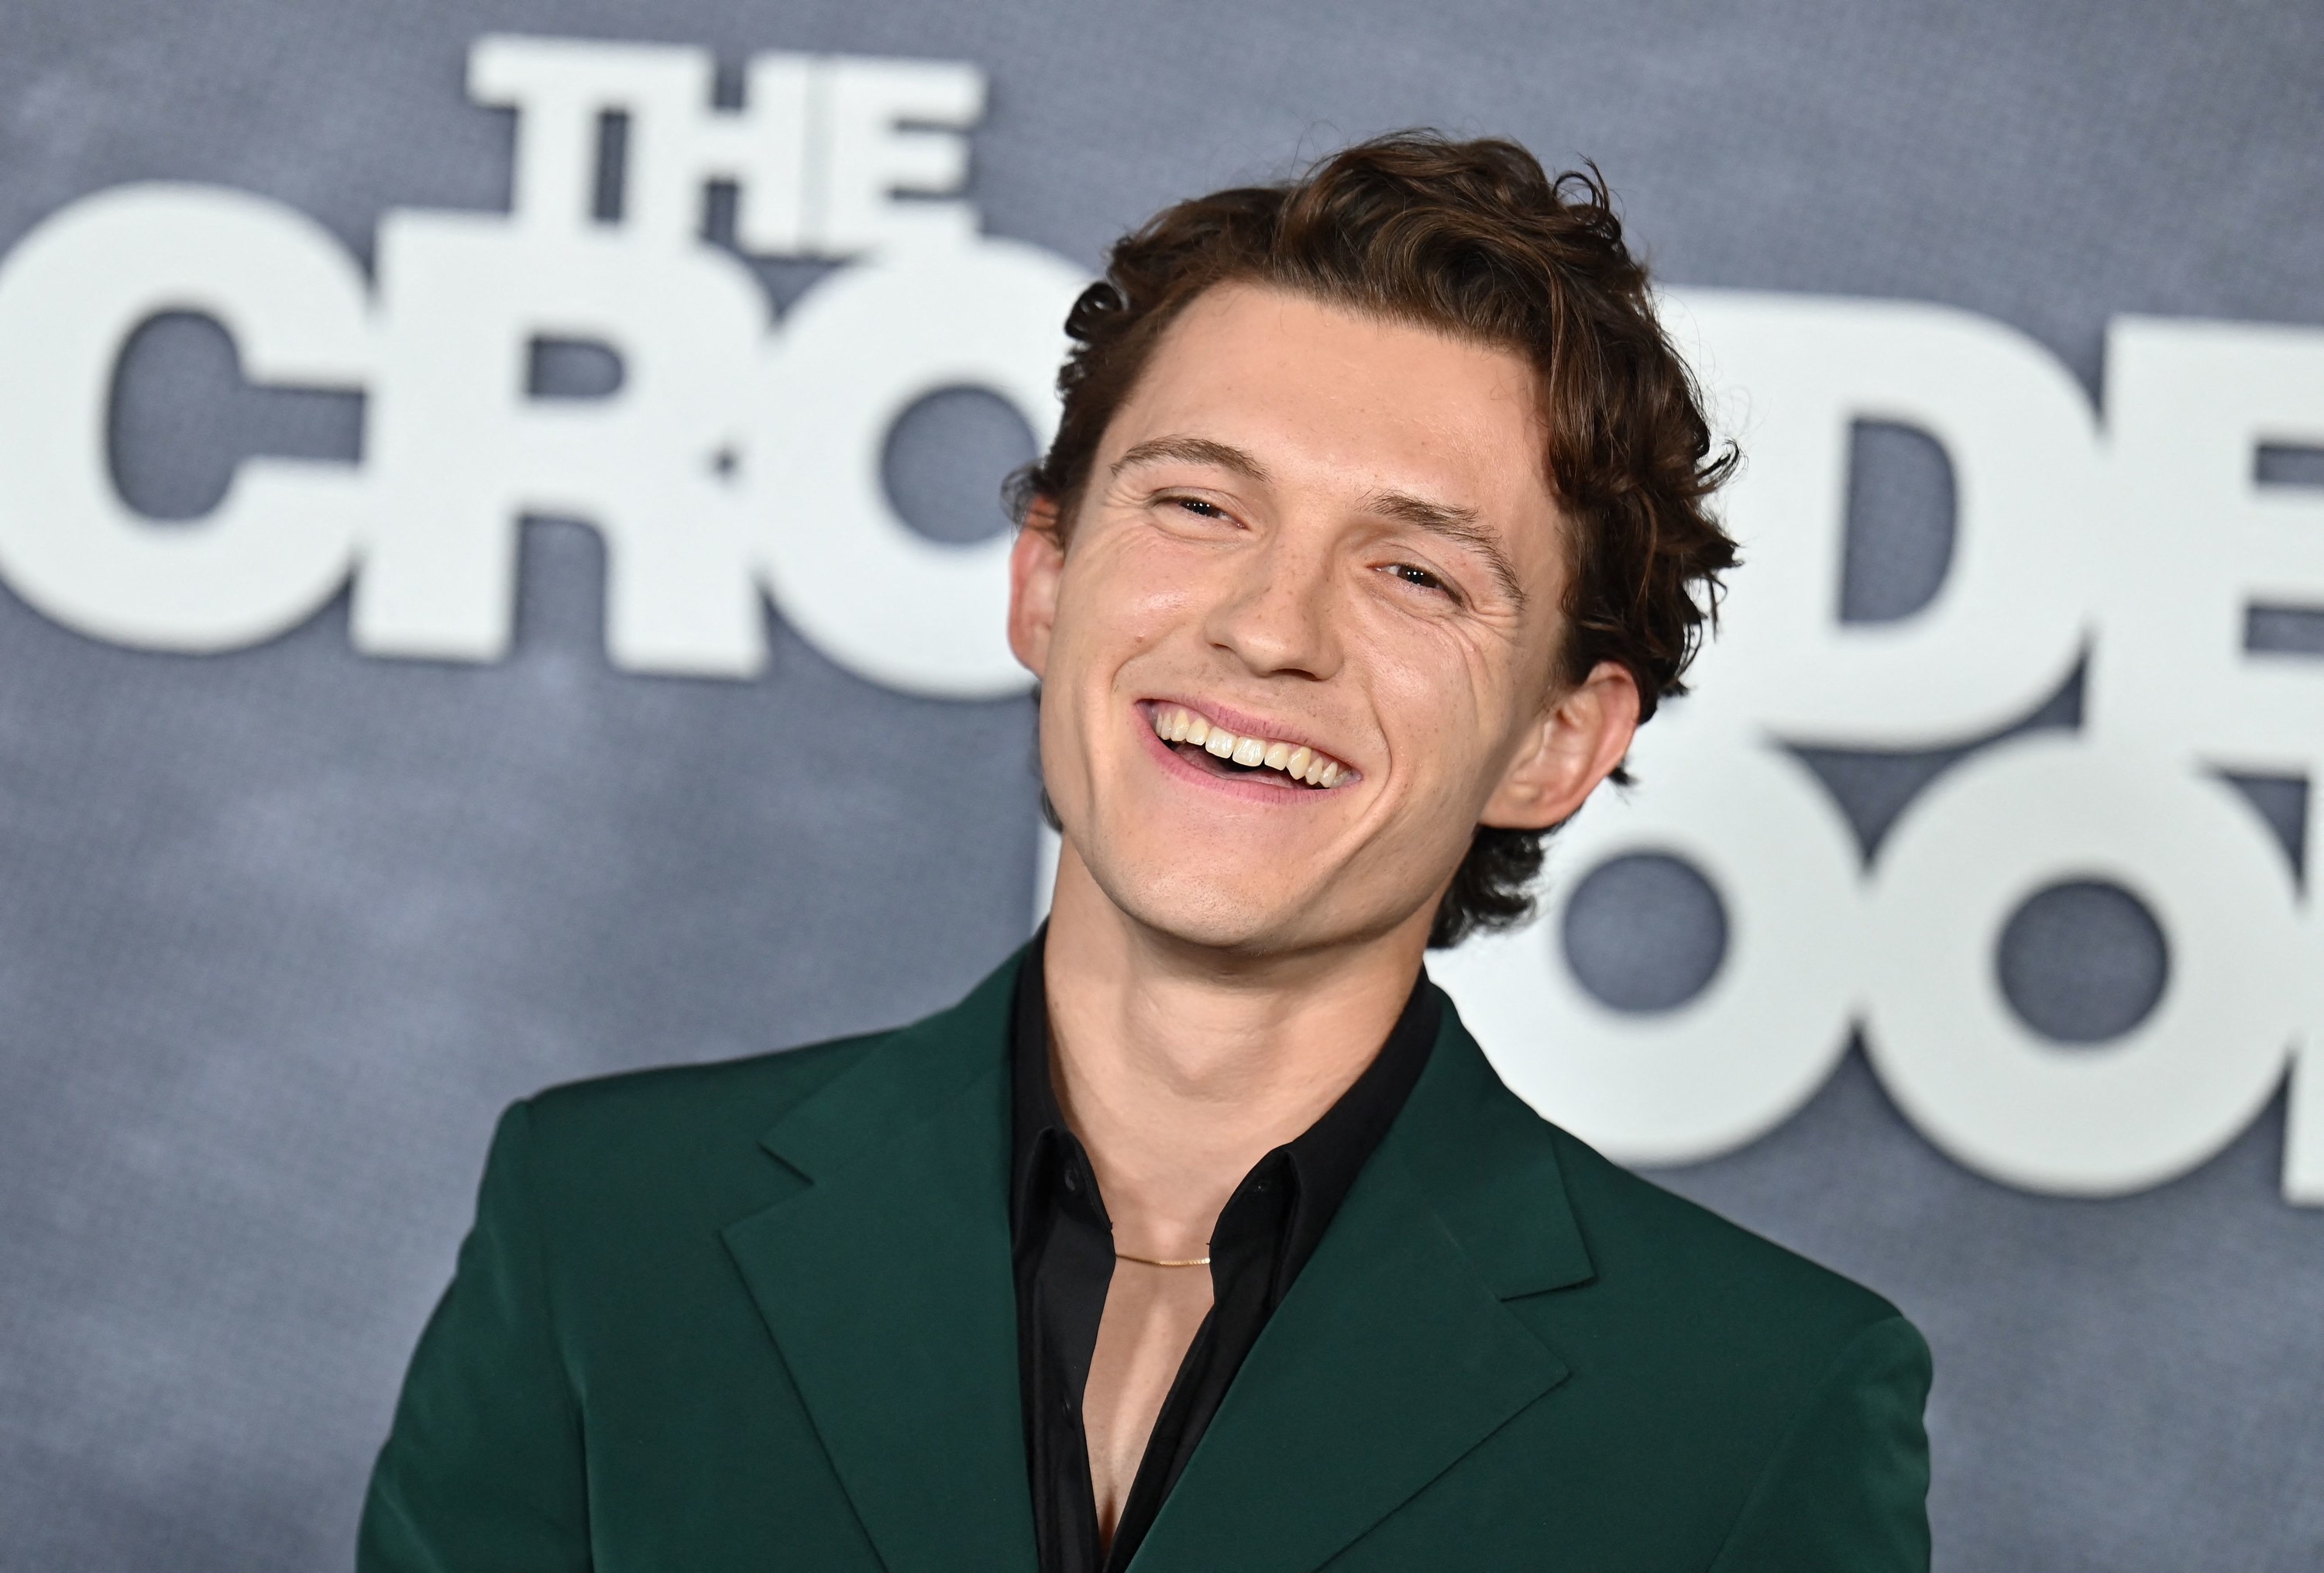 Tom Holland smiling at a TV show premiere